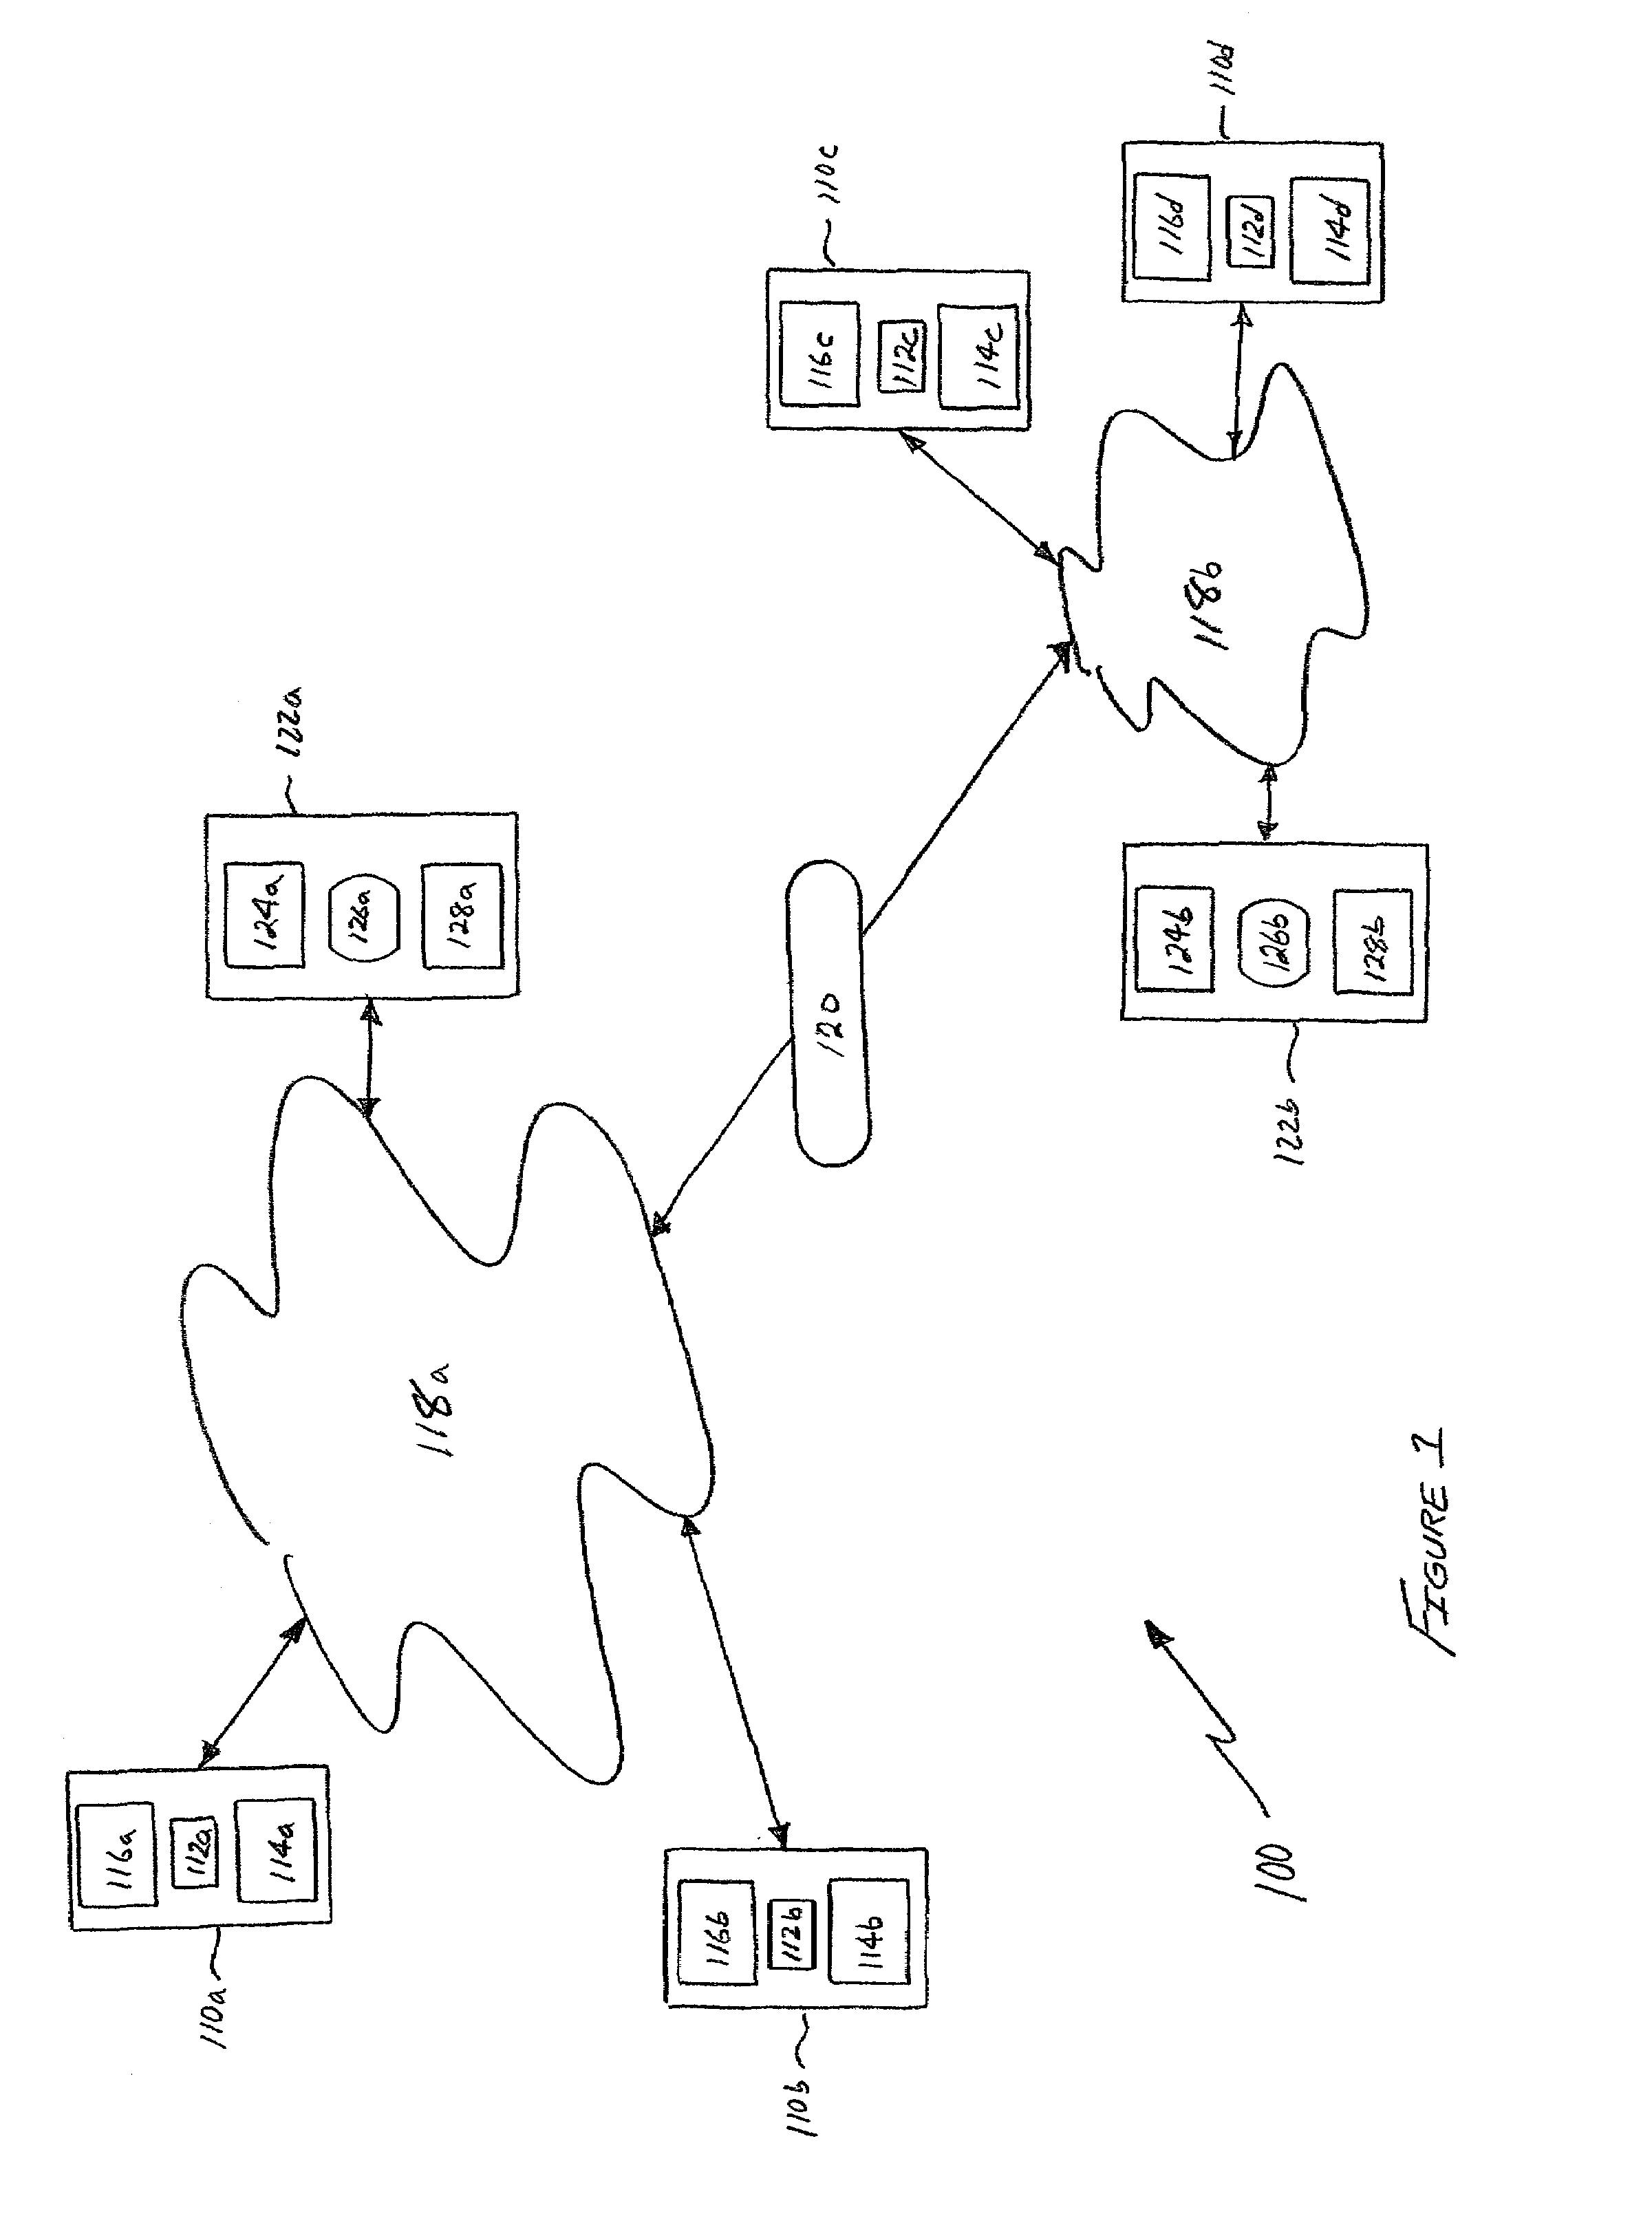 Systems and methods for making electronic files that have been converted to a safe format available for viewing by an intended recipient